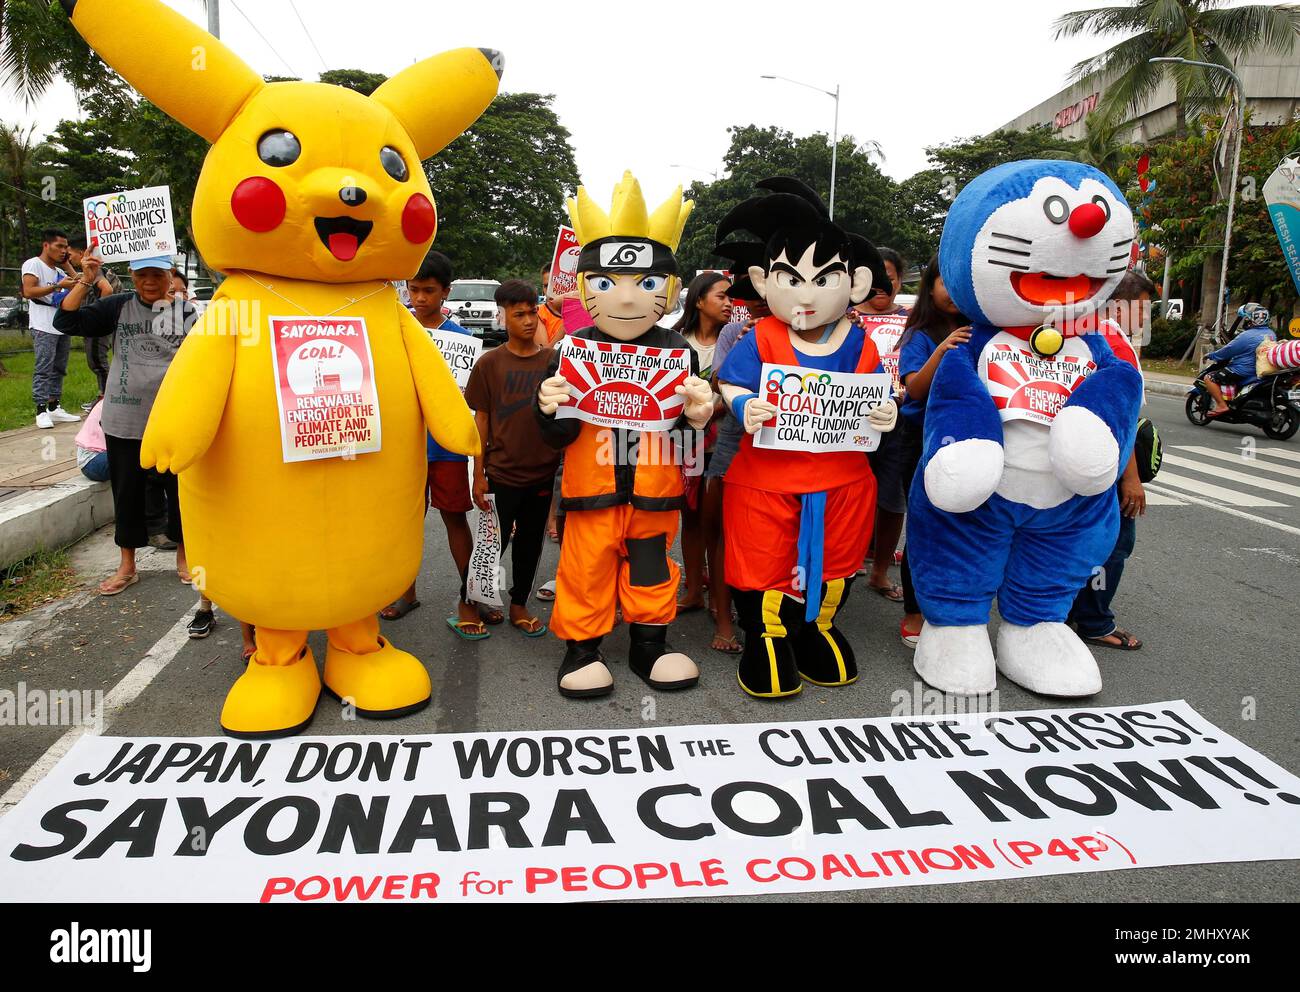 Environmental activists, dressed in anime costumes as, from left, Pikachu, Naruto, Goku and Doraemon, join other activists in a rally to call on Japanese government to stop funding coal especially to the ASEAN region, which they claim contributes to the worsening climate change globally Wednesday, Oct. 9, 2019 in suburban Pasay city, south of Manila, Philippines. The protest coincided with the ASEAN senior officials meeting on sports that was attended by Japan as it hosts the 2020 Olympics. (AP Photo/Bullit Marquez) Stock Photo